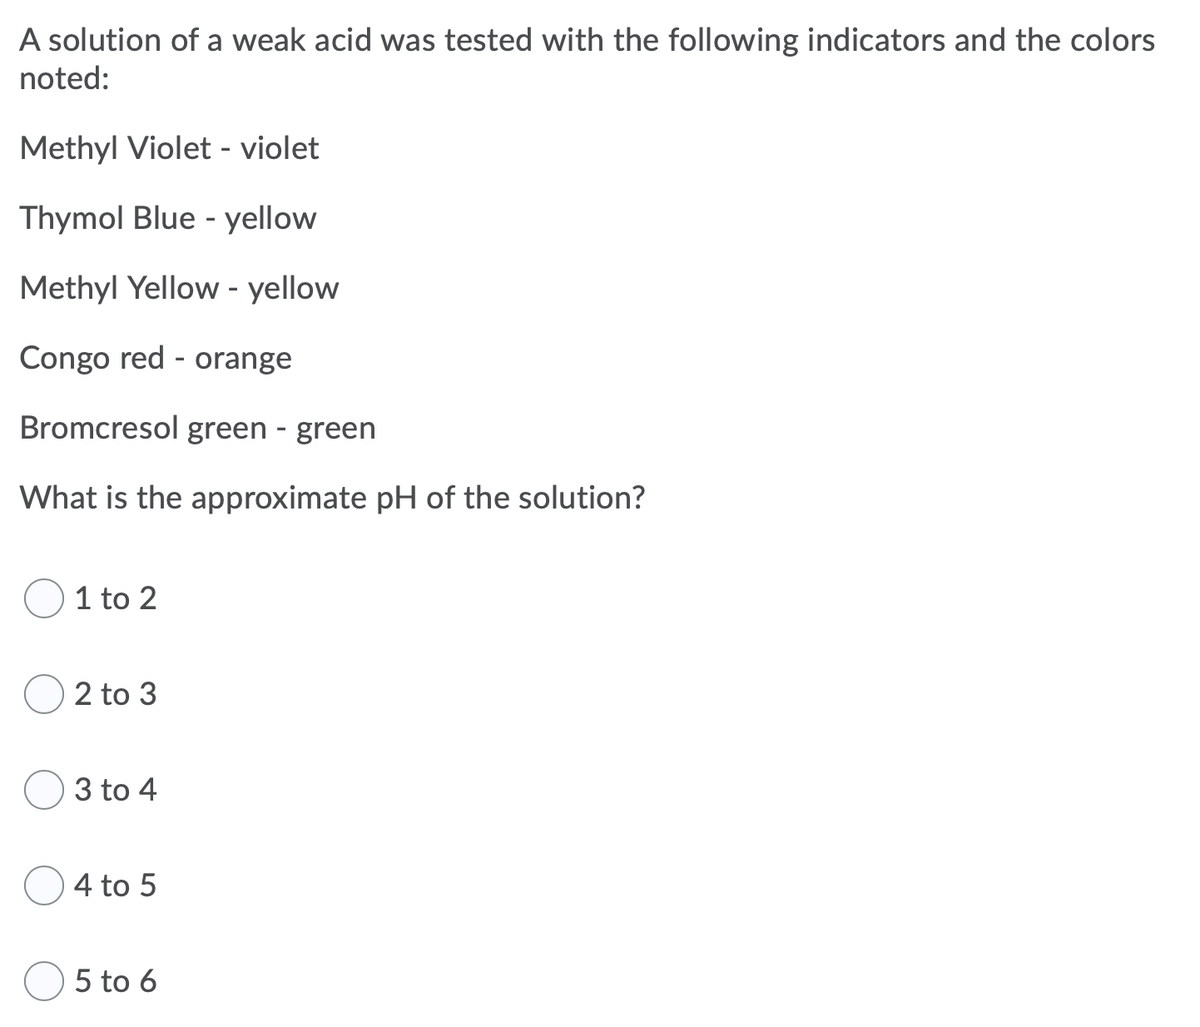 A solution of a weak acid was tested with the following indicators and the colors
noted:
Methyl Violet - violet
Thymol Blue - yellow
Methyl Yellow - yellow
Congo red - orange
Bromcresol green - green
What is the approximate pH of the solution?
1 to 2
2 to 3
3 to 4
4 to 5
5 to 6
